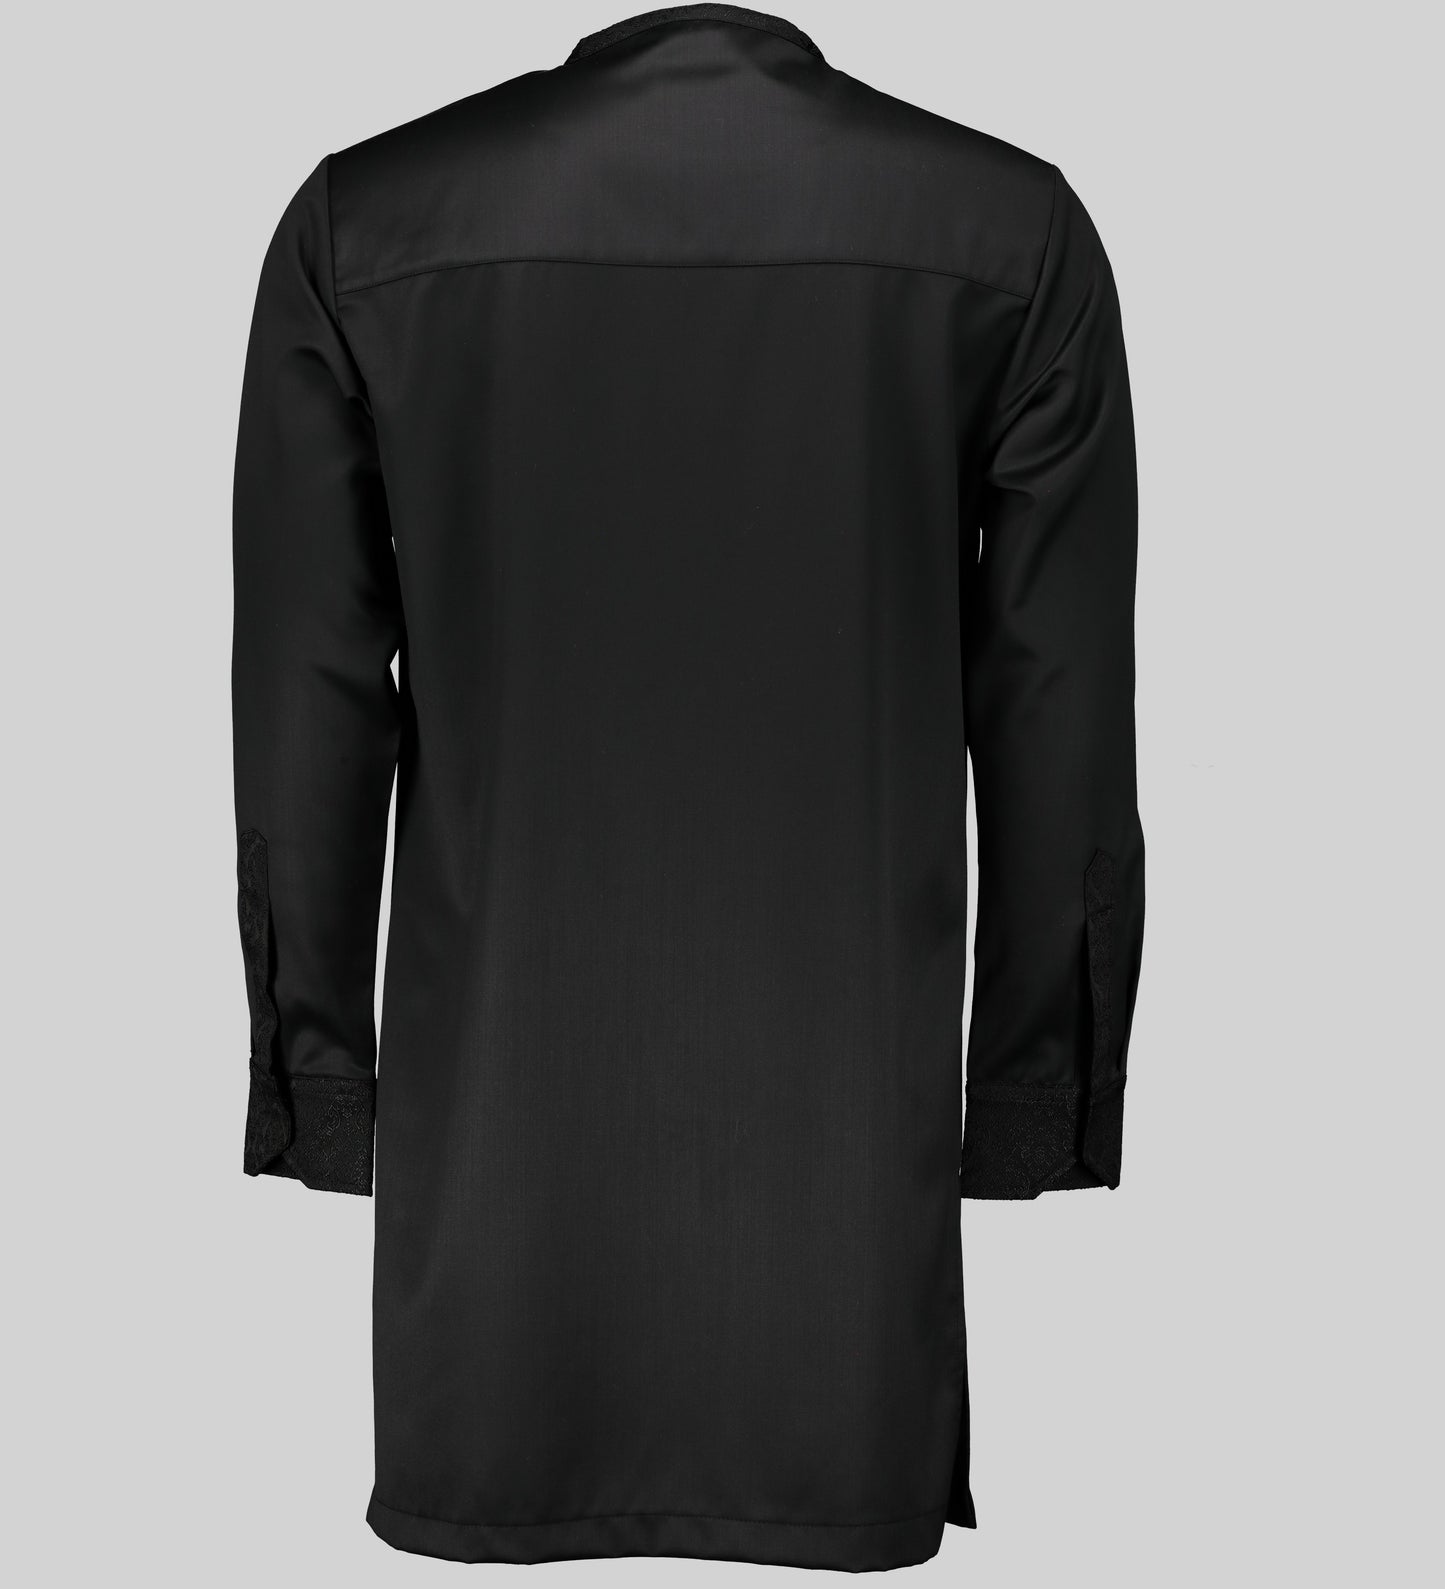 Backside of the Black Dashiki Shirt in Luxury Cotton with Black Brocade Trims. 